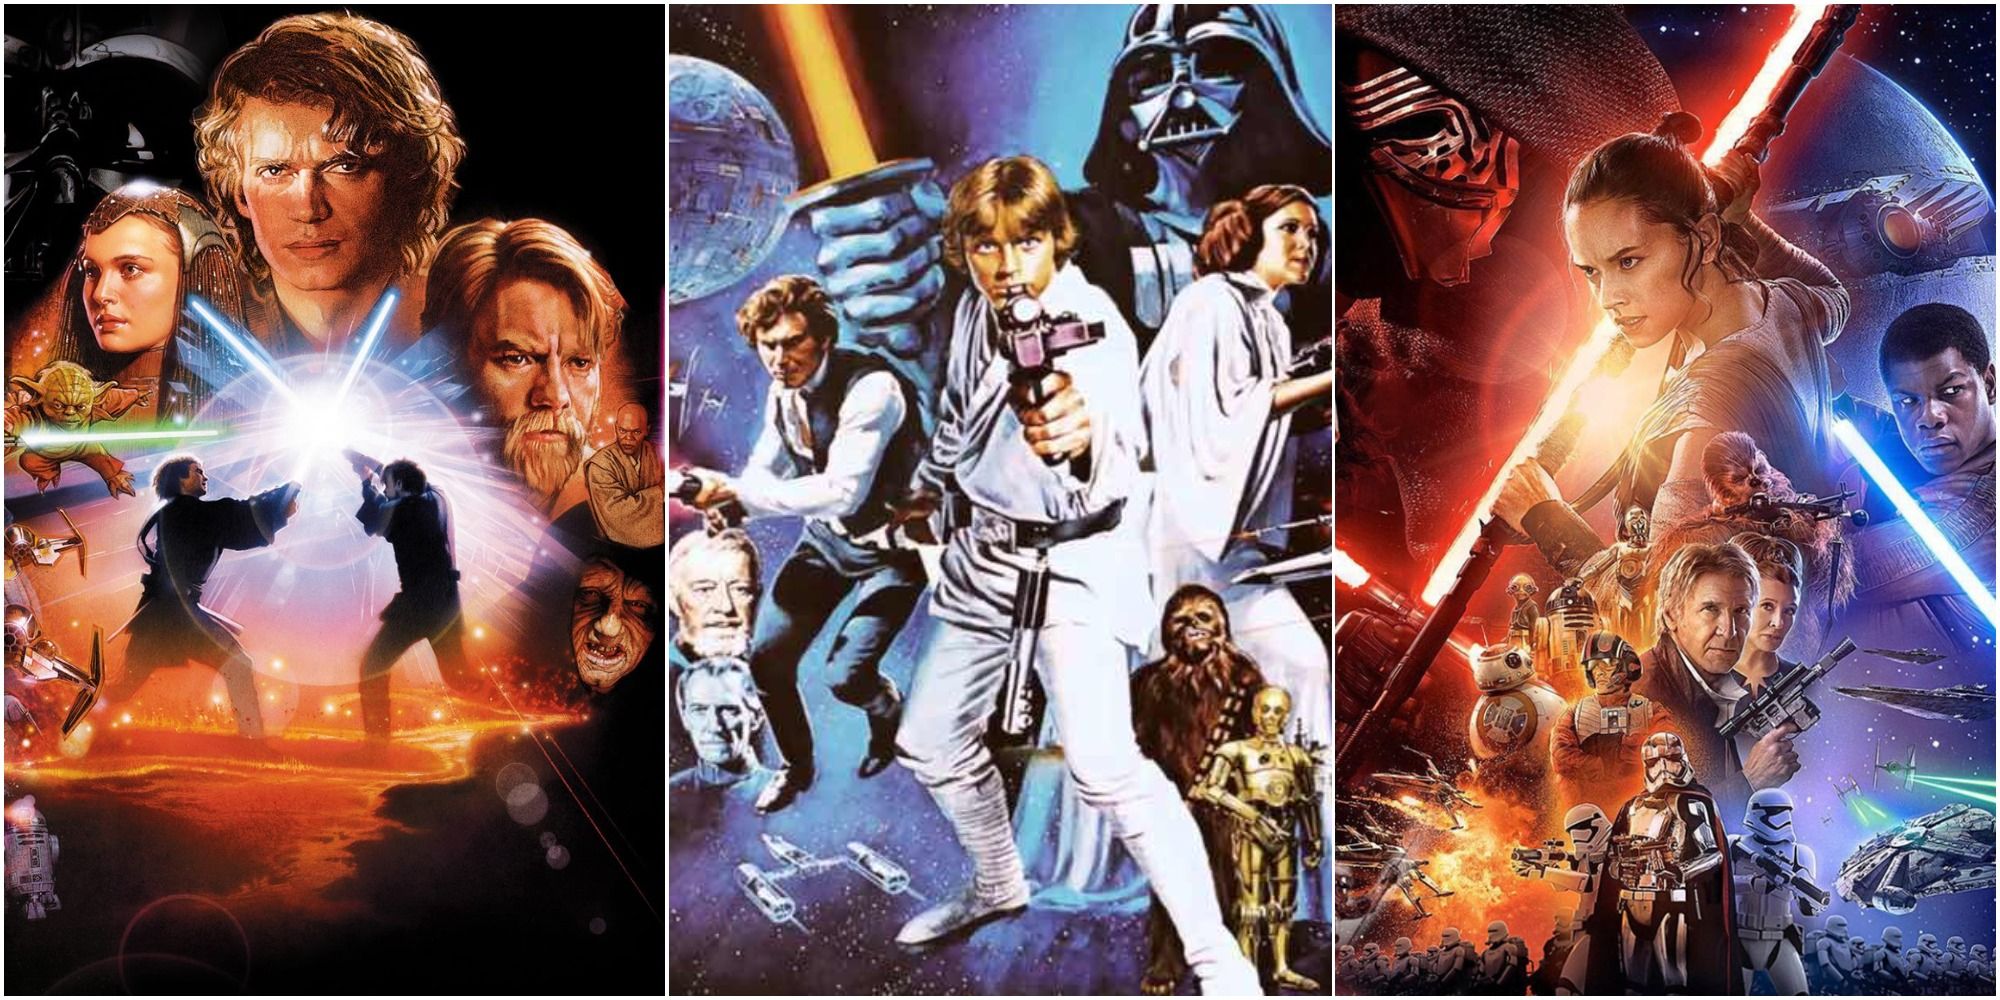 How Every Star Wars Movie Compares in Rotten Tomatoes